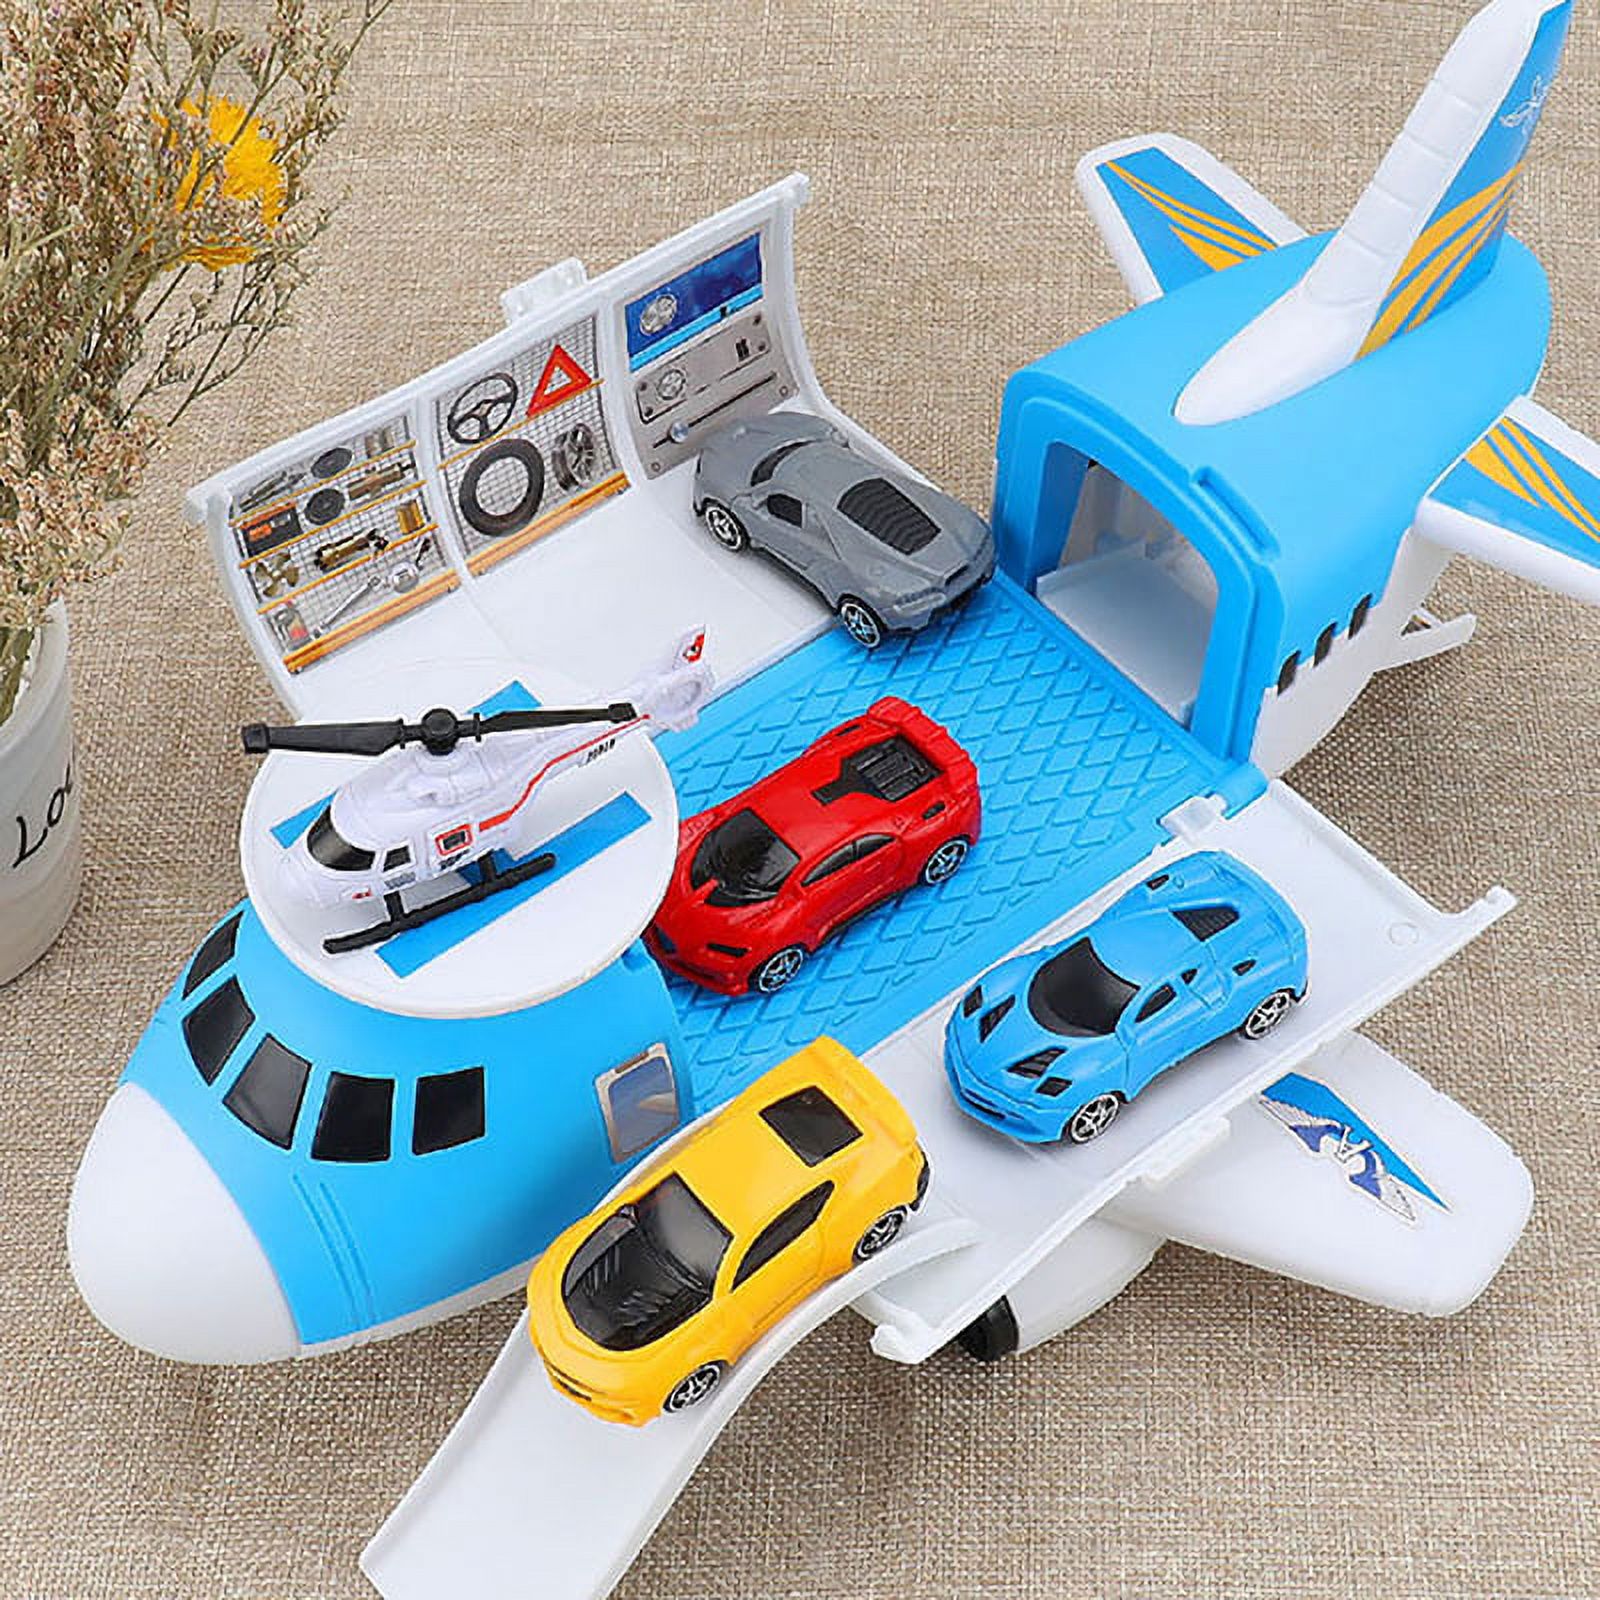 Luxsea Children's Airplane Model Storage Transport Alloy Car Passenger Aircraft Model Combination Kids Gift Educational Puzzle Storage Toys - image 1 of 8